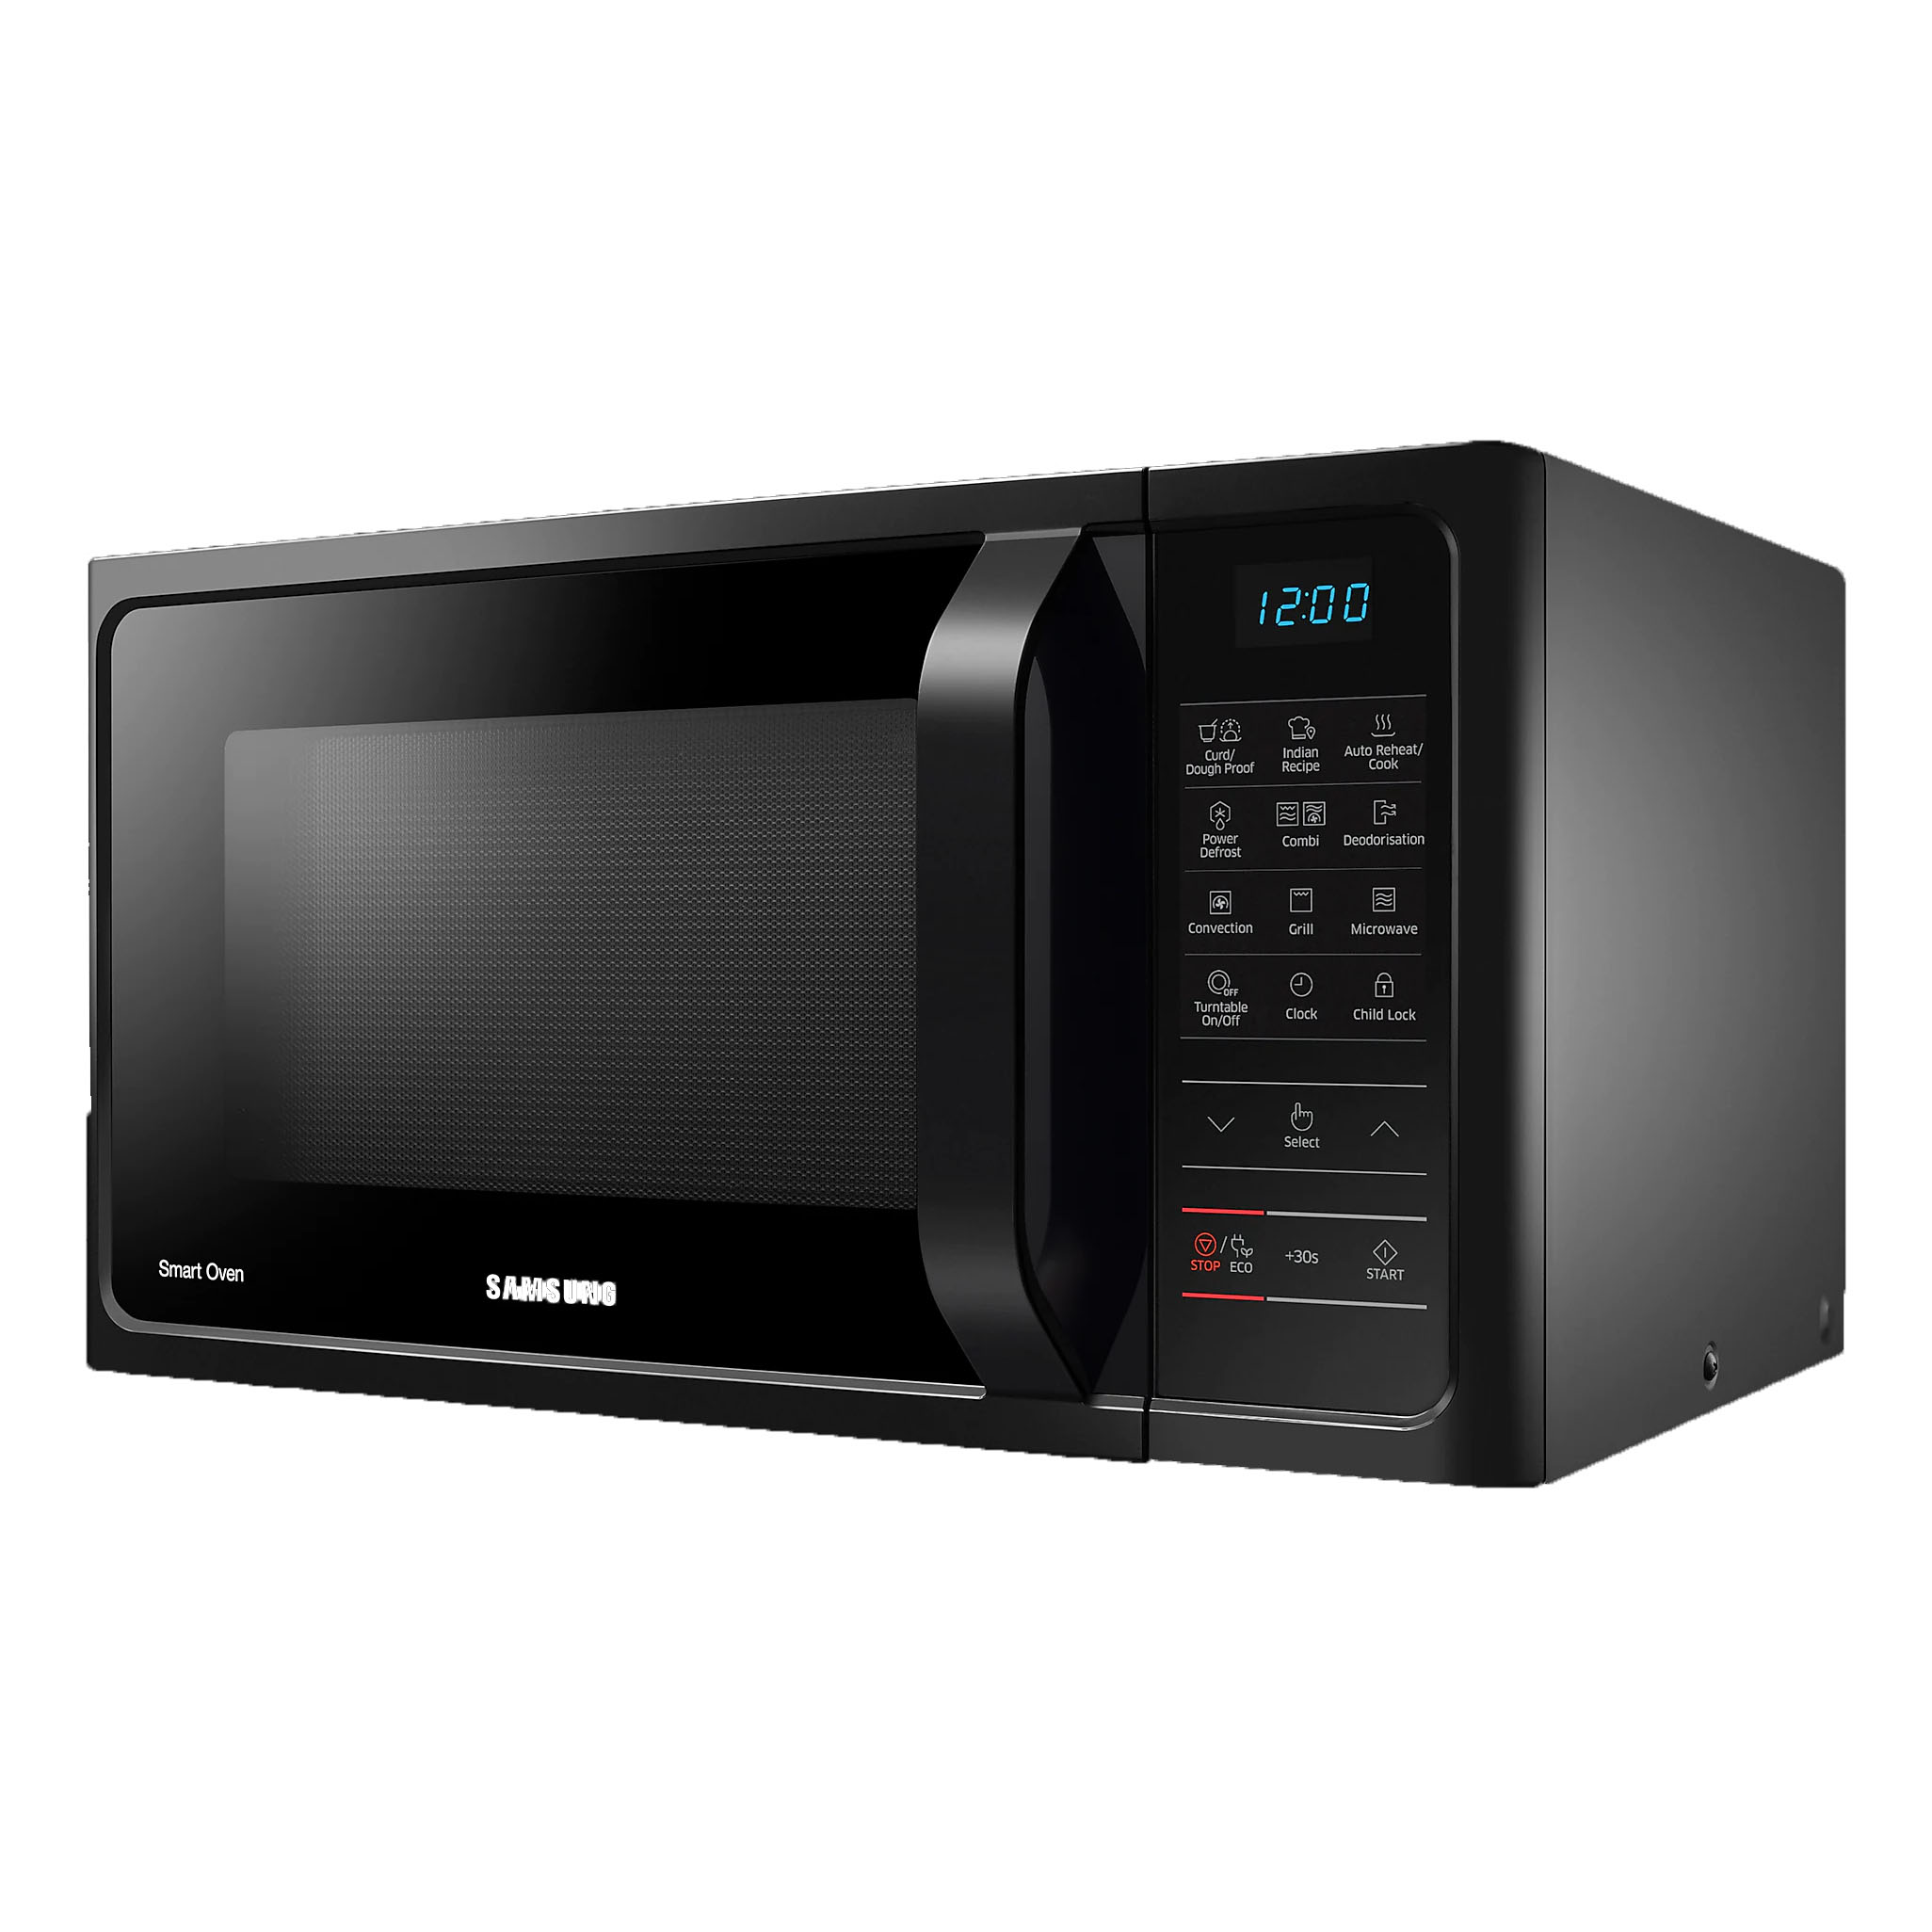 SAMSUNG 28 Liter Grill Convection Microwave Oven with Tripple Distribution System MC28H5023AK/D2